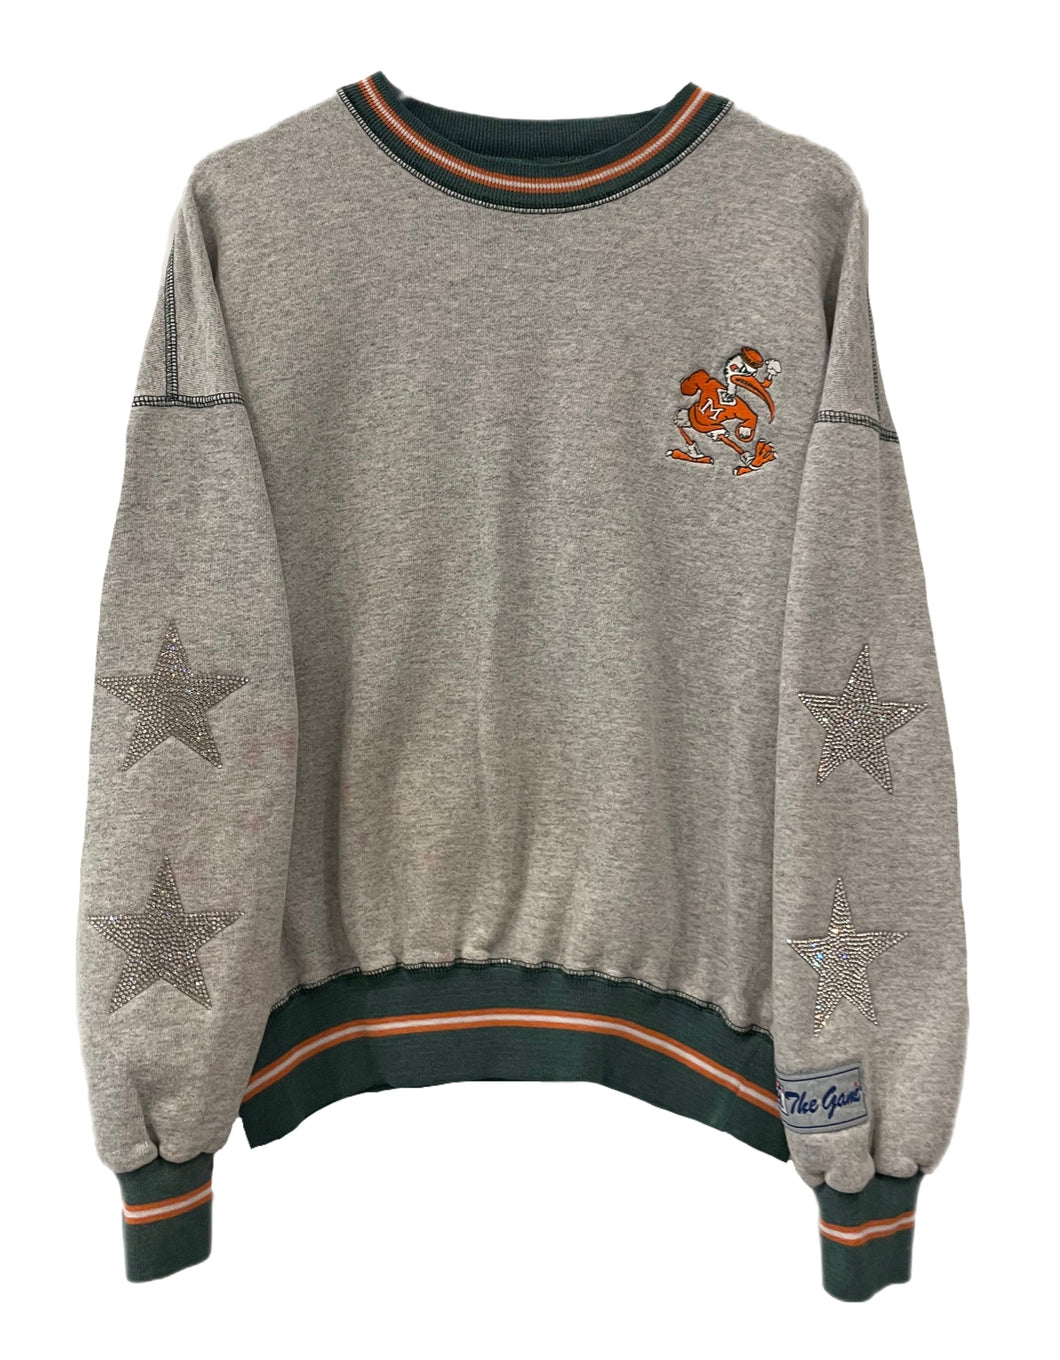 University of Miami, One of a KIND Vintage Miami Hurricanes Sweatshirt with Crystal Star Design